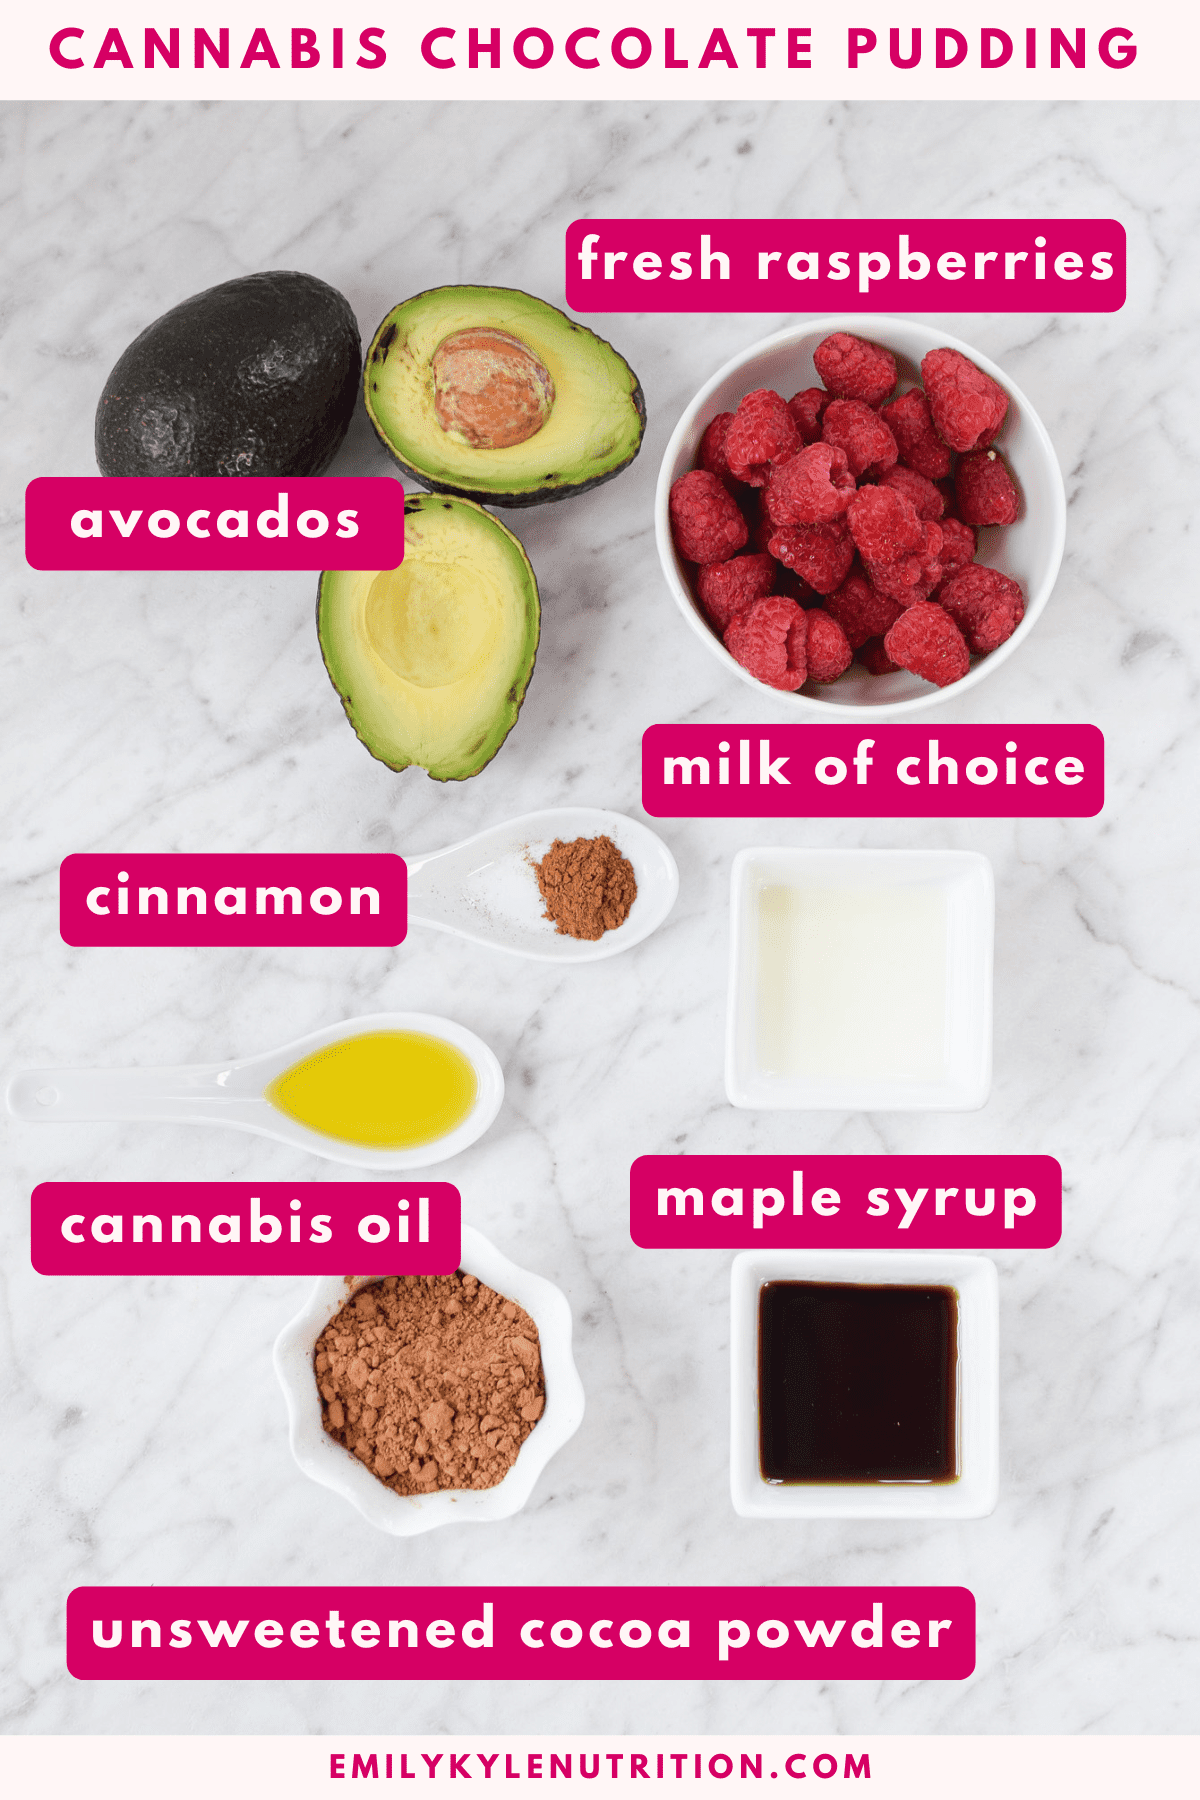 An ingredient collage that contains all of the ingredients needed to make cannabis chocolate pudding.